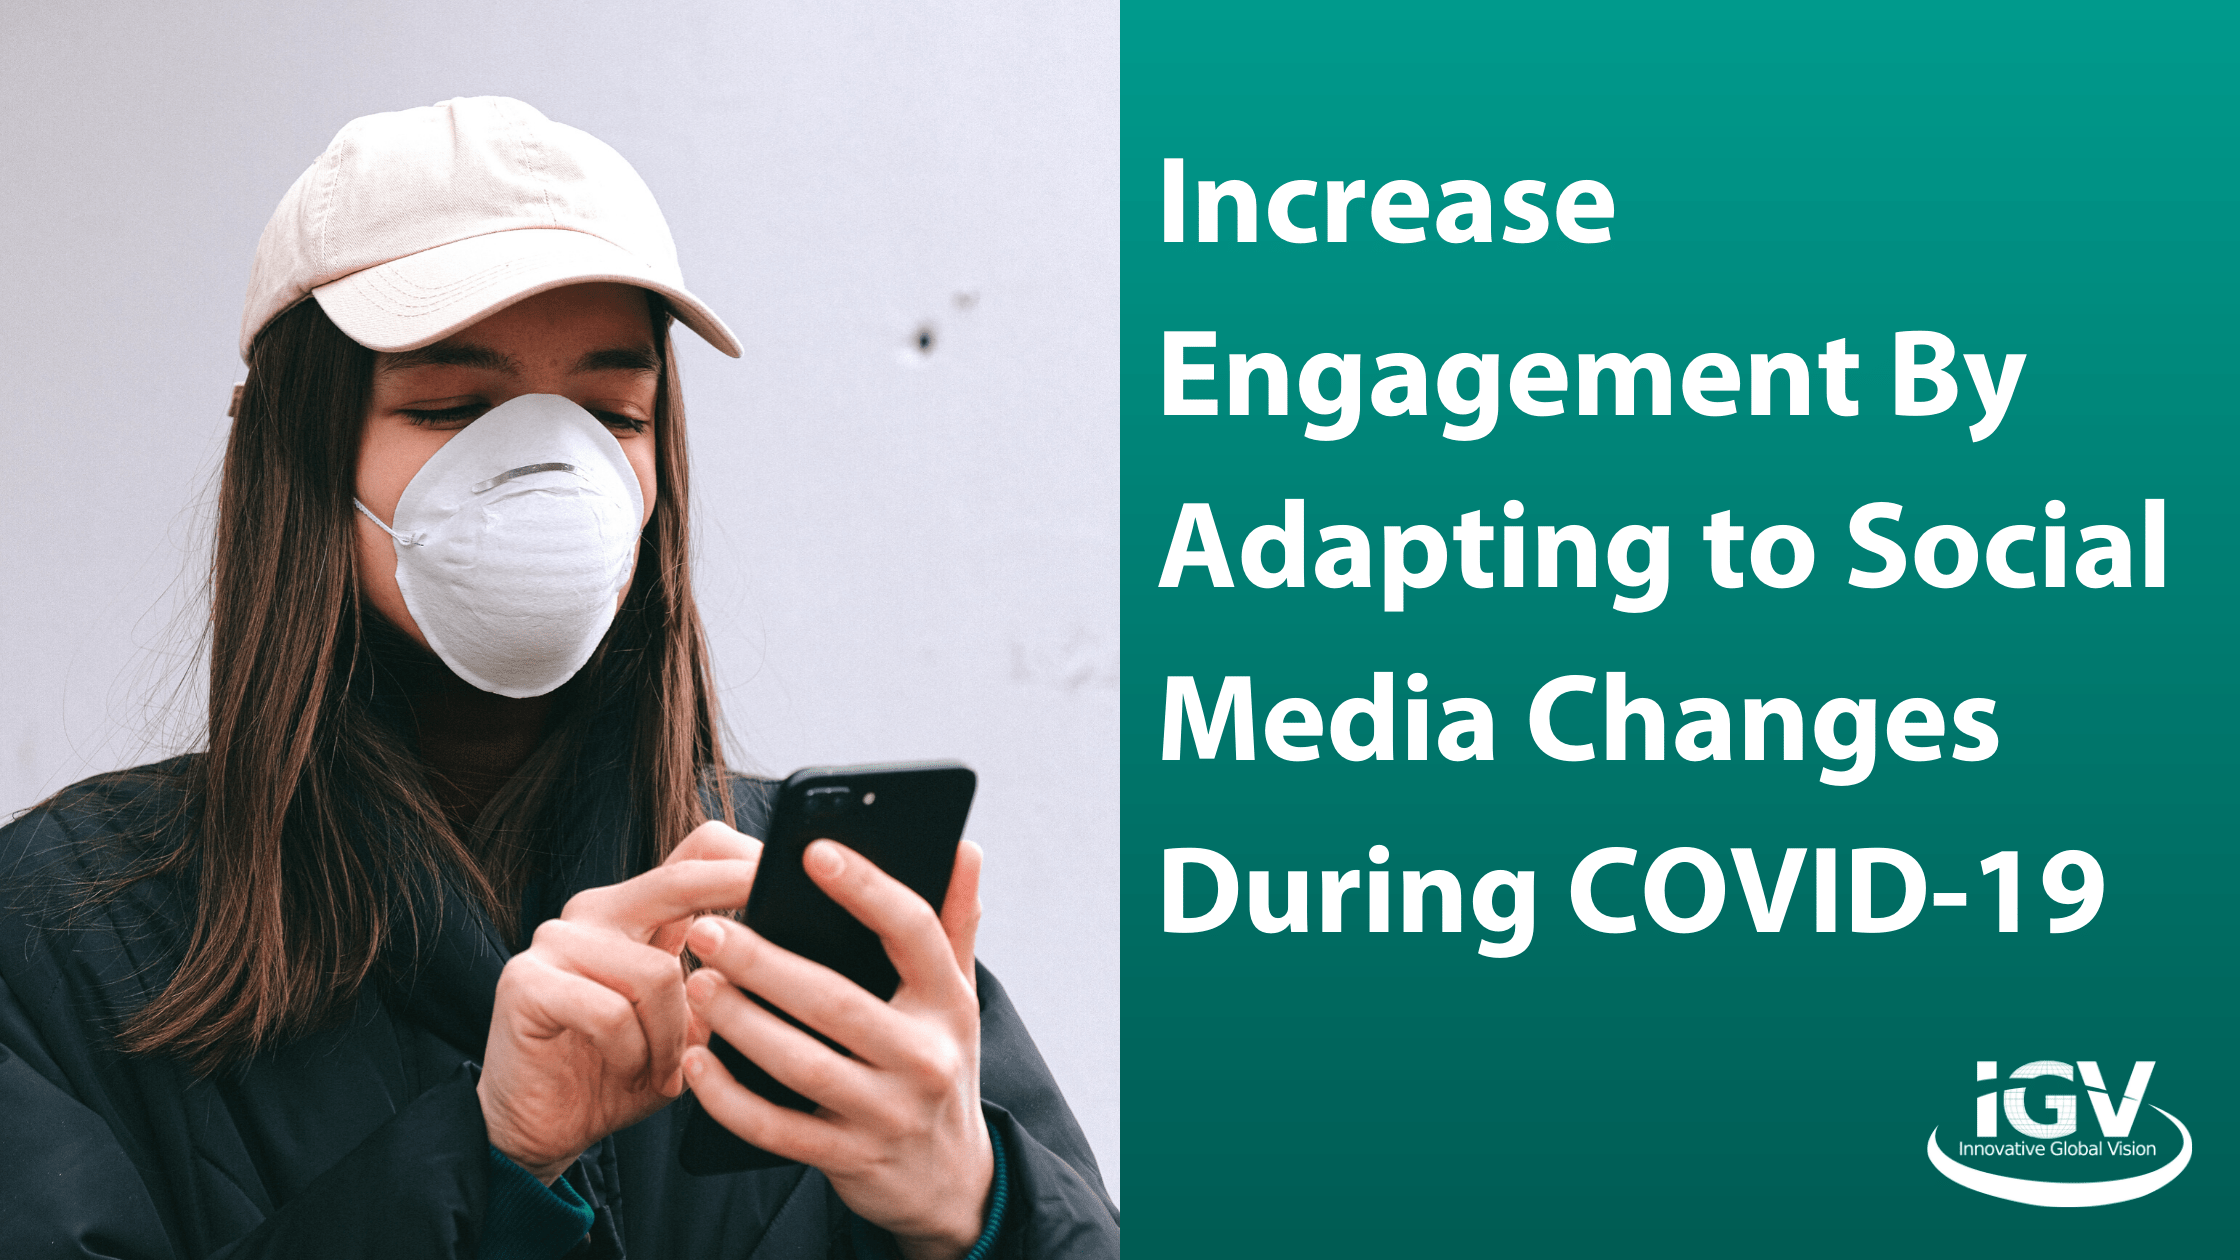 Increase Engagement By Adapting to Social Media Changes During COVID-19